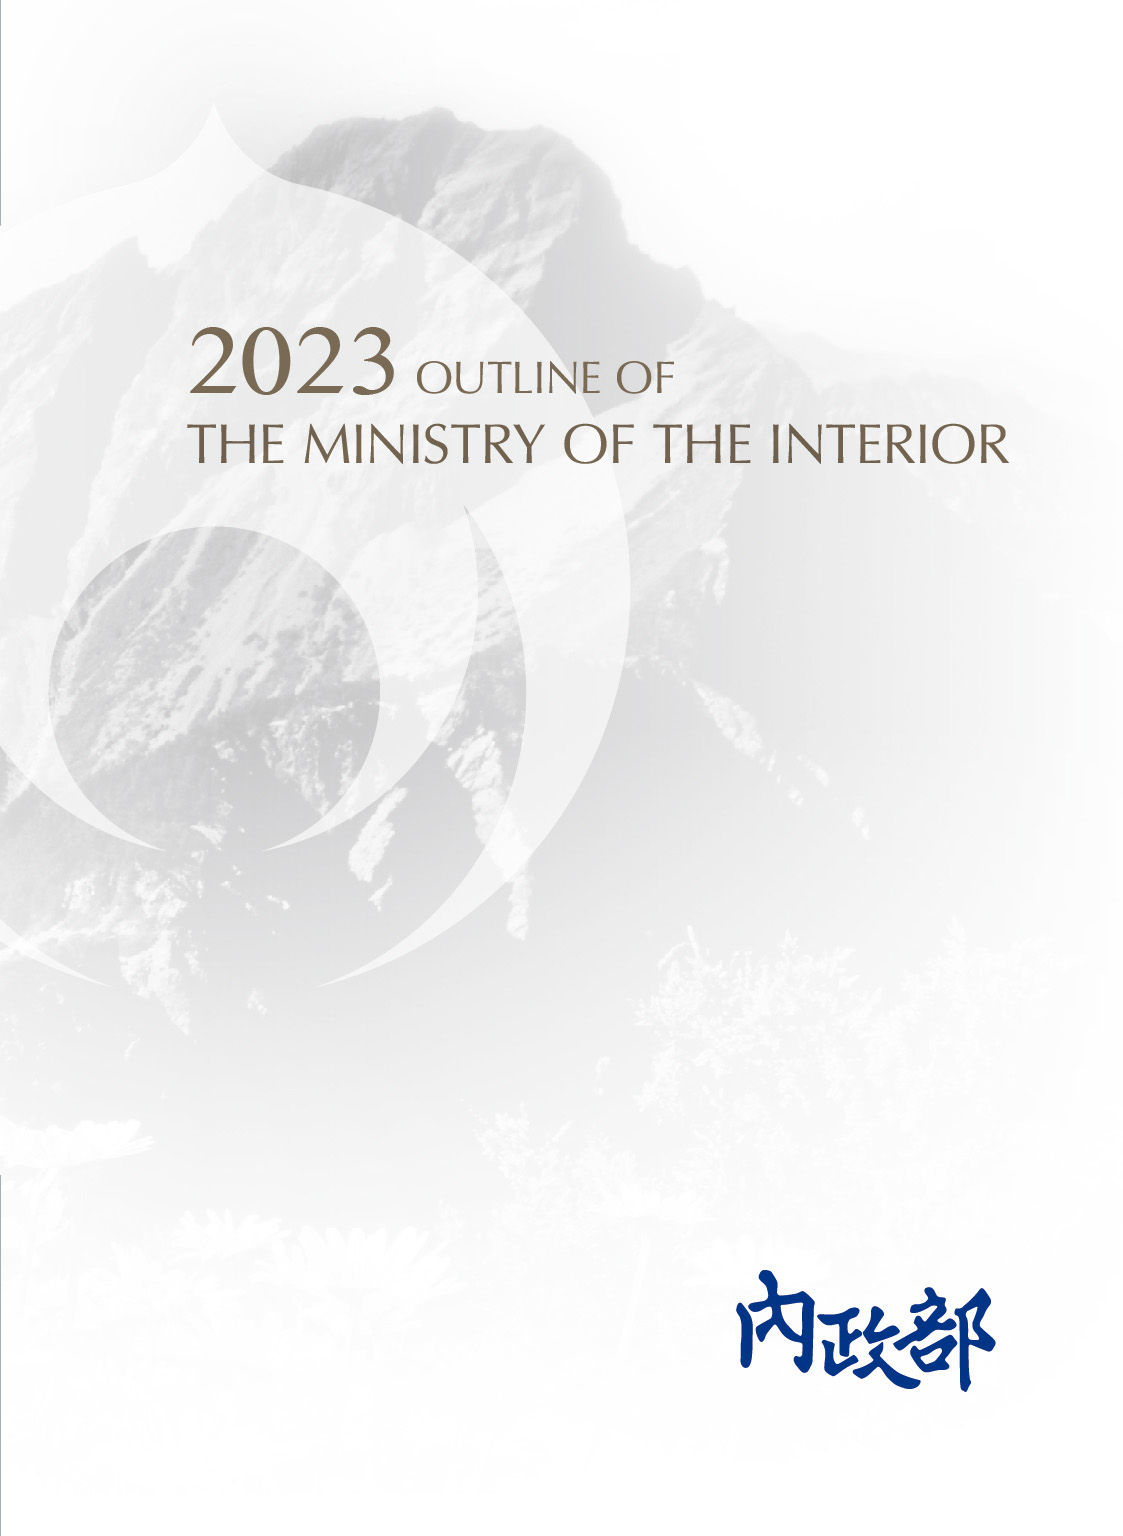 2023 OUTLINE OF THE MINISTRY OF THE INTERIOR REPUBLIC OF CHINA (TAIWAN)